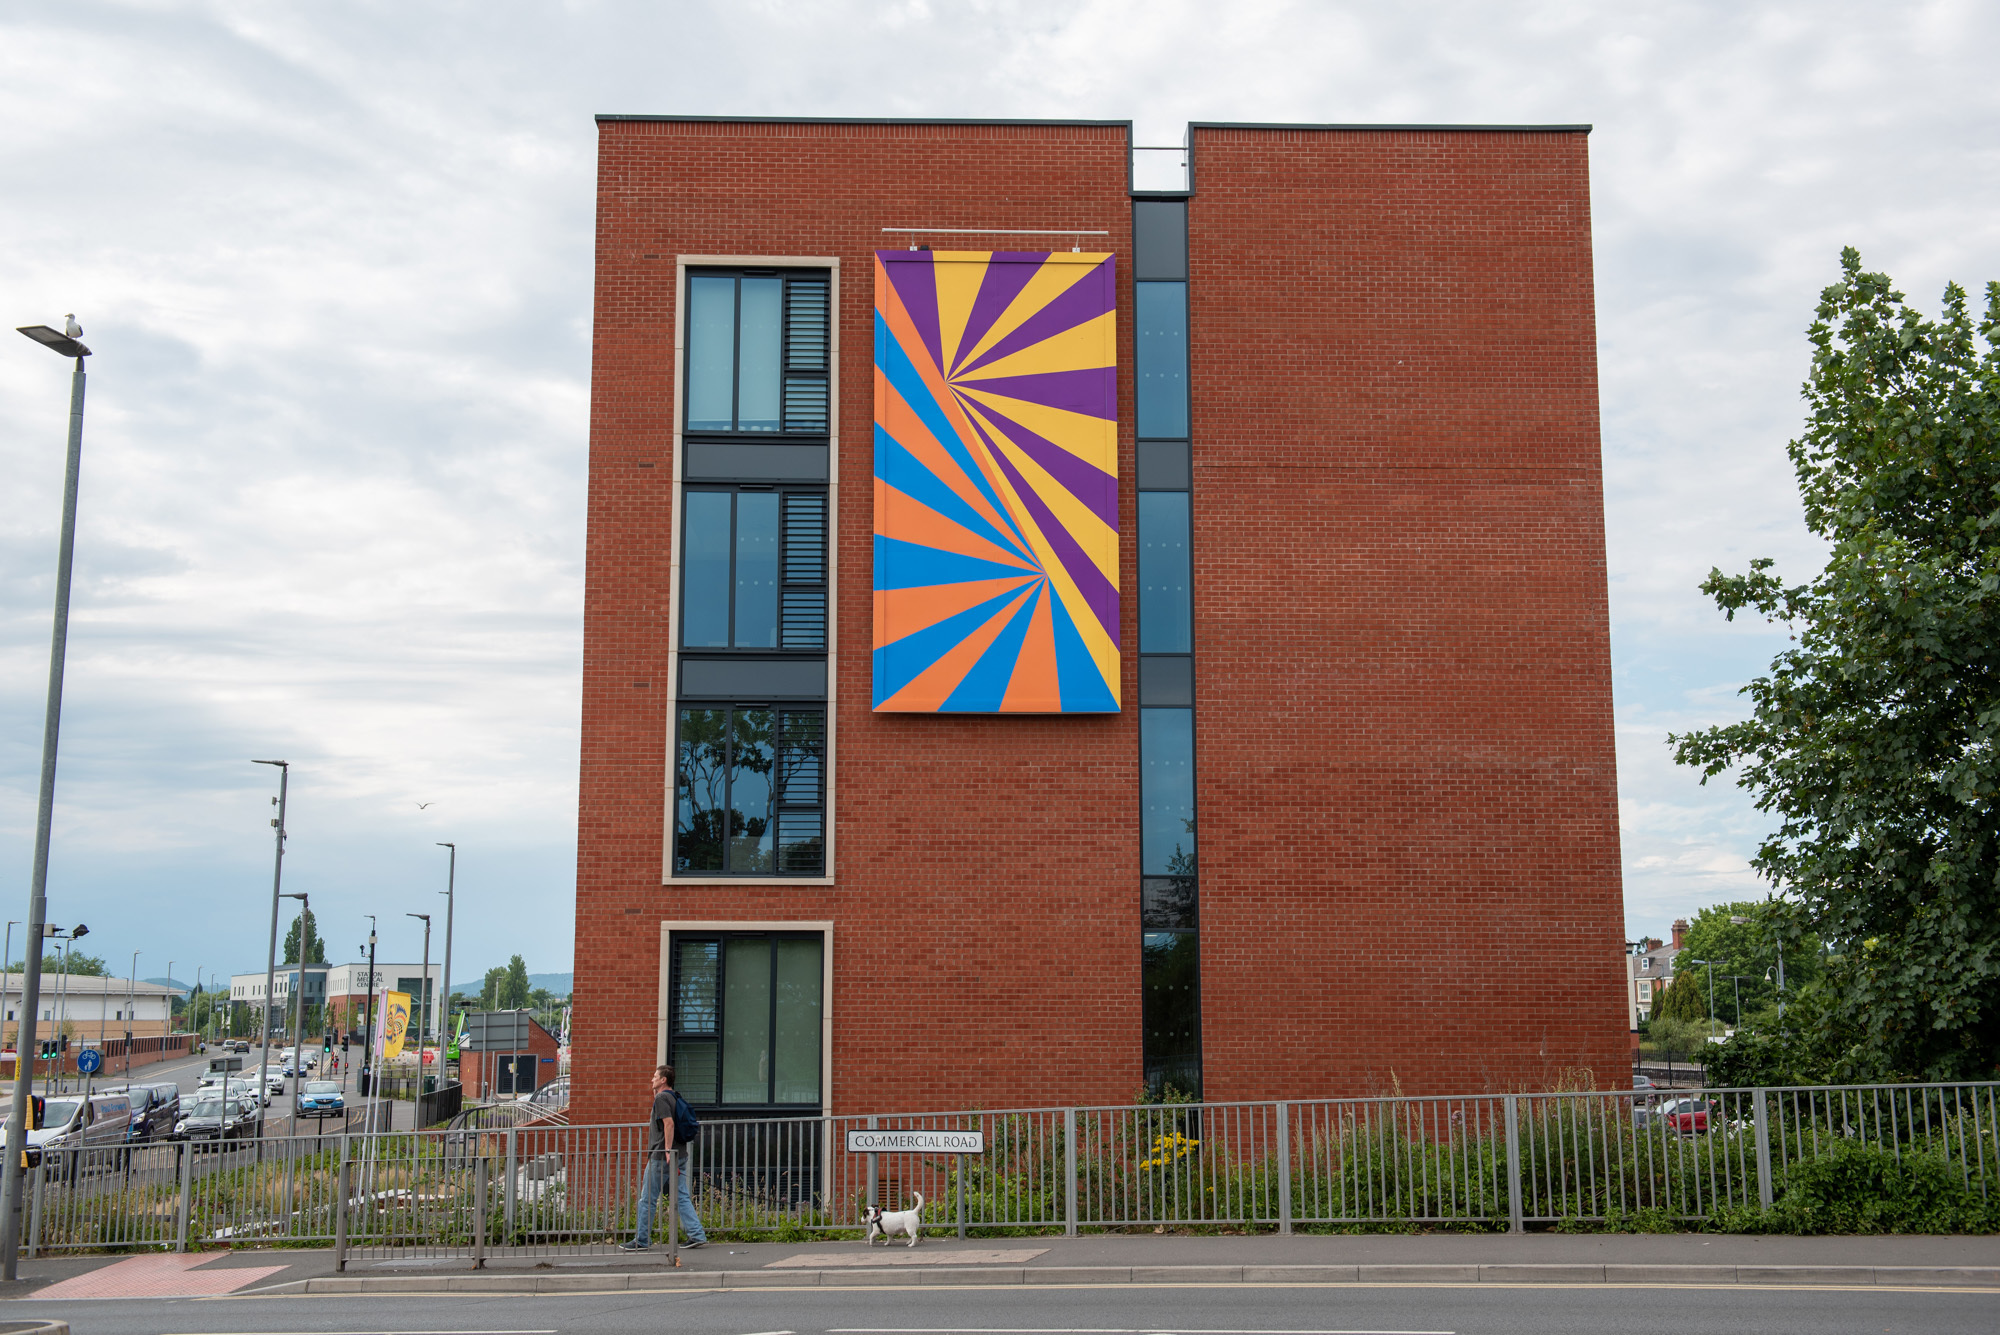 Artwork on the Station Approach student accomodation is part of the plan. Picture: Oliver Cameron-Swan